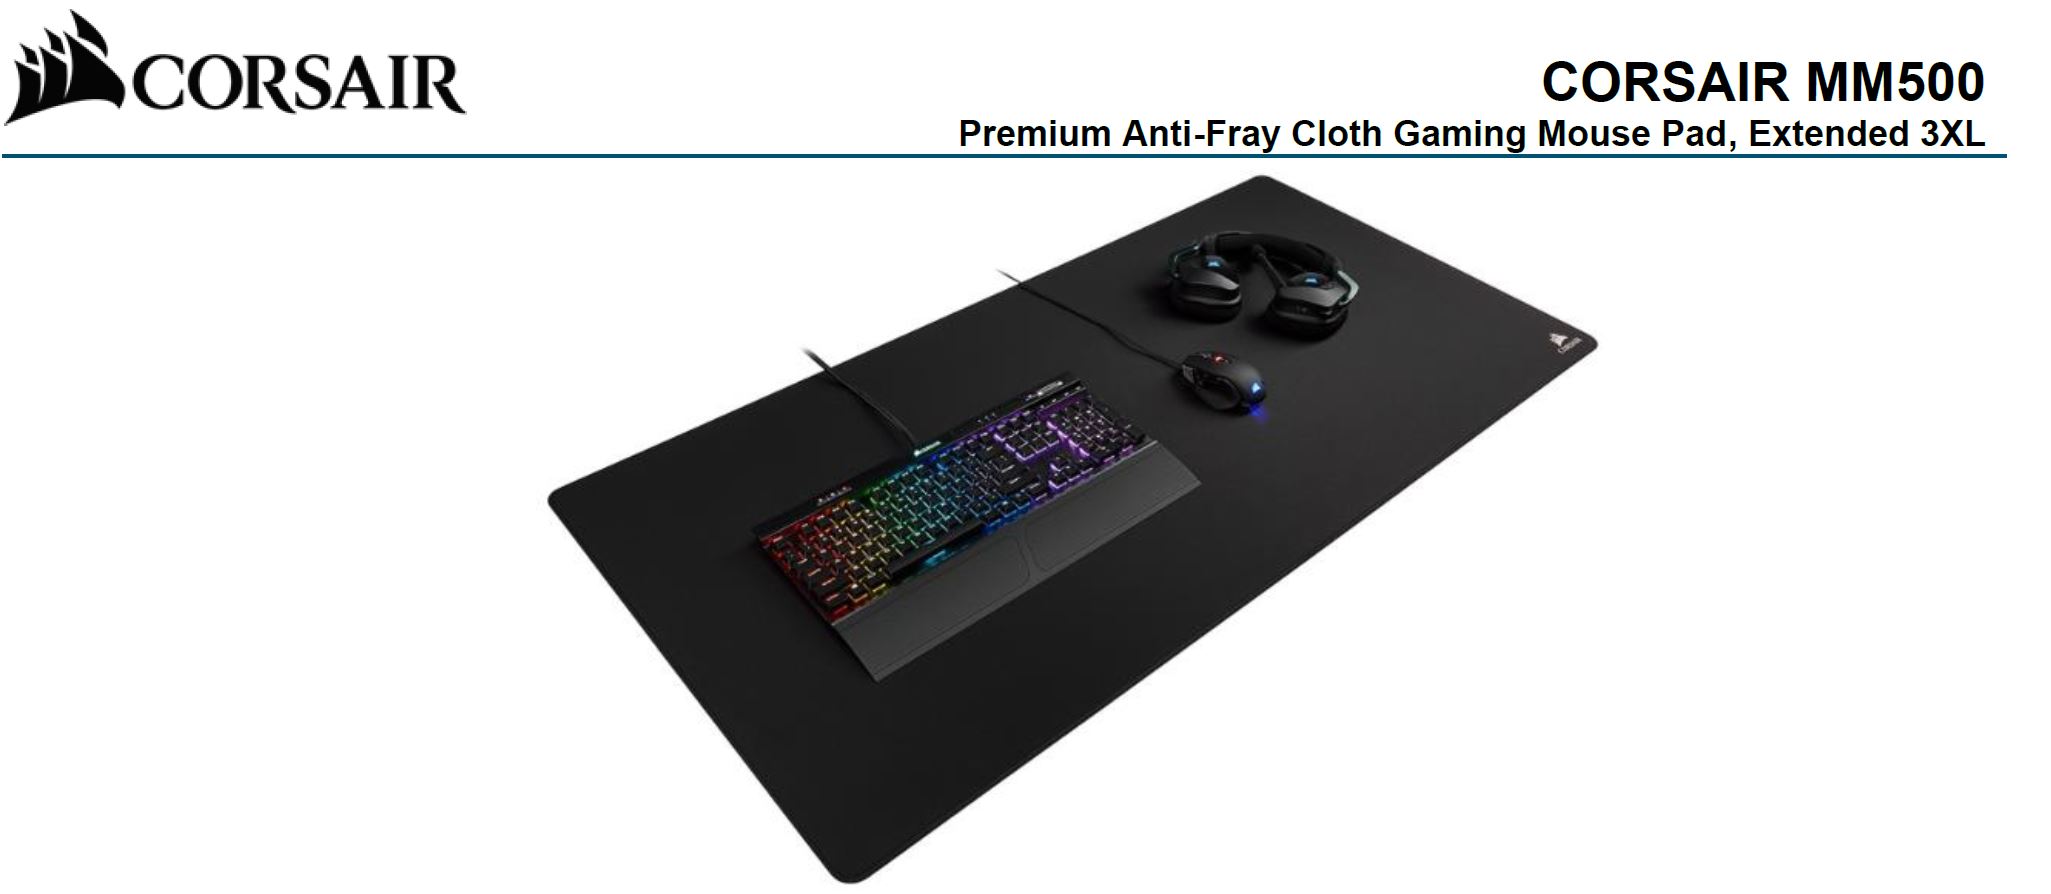 Corsair MM500 EXTENDED 3XL Anti-Fray and Comfort Gaming, 1220mm x 610mm x 3mm GAMING MOUSE MAT